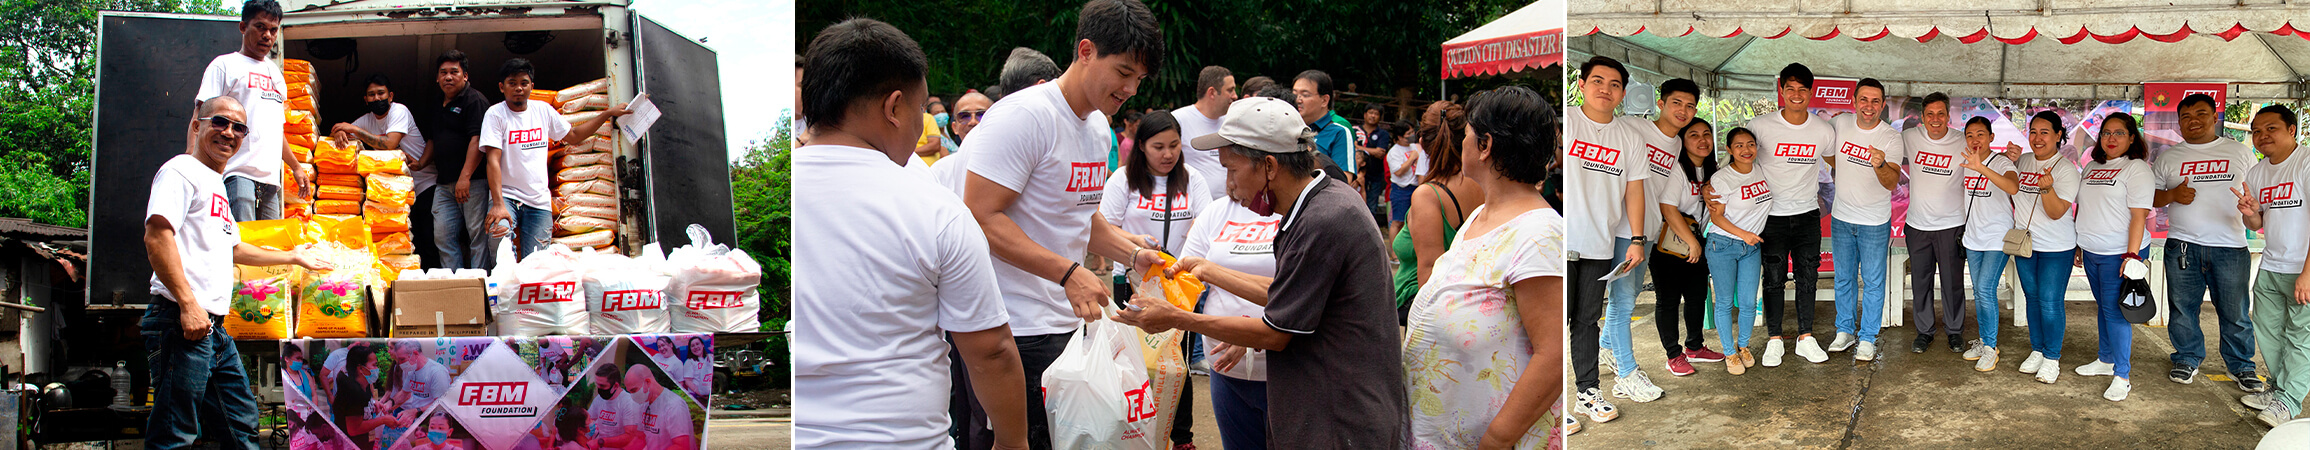 FBM® Foundation helps 350 families  in Quezon City under the Bayanihan para sa Kababayan project 